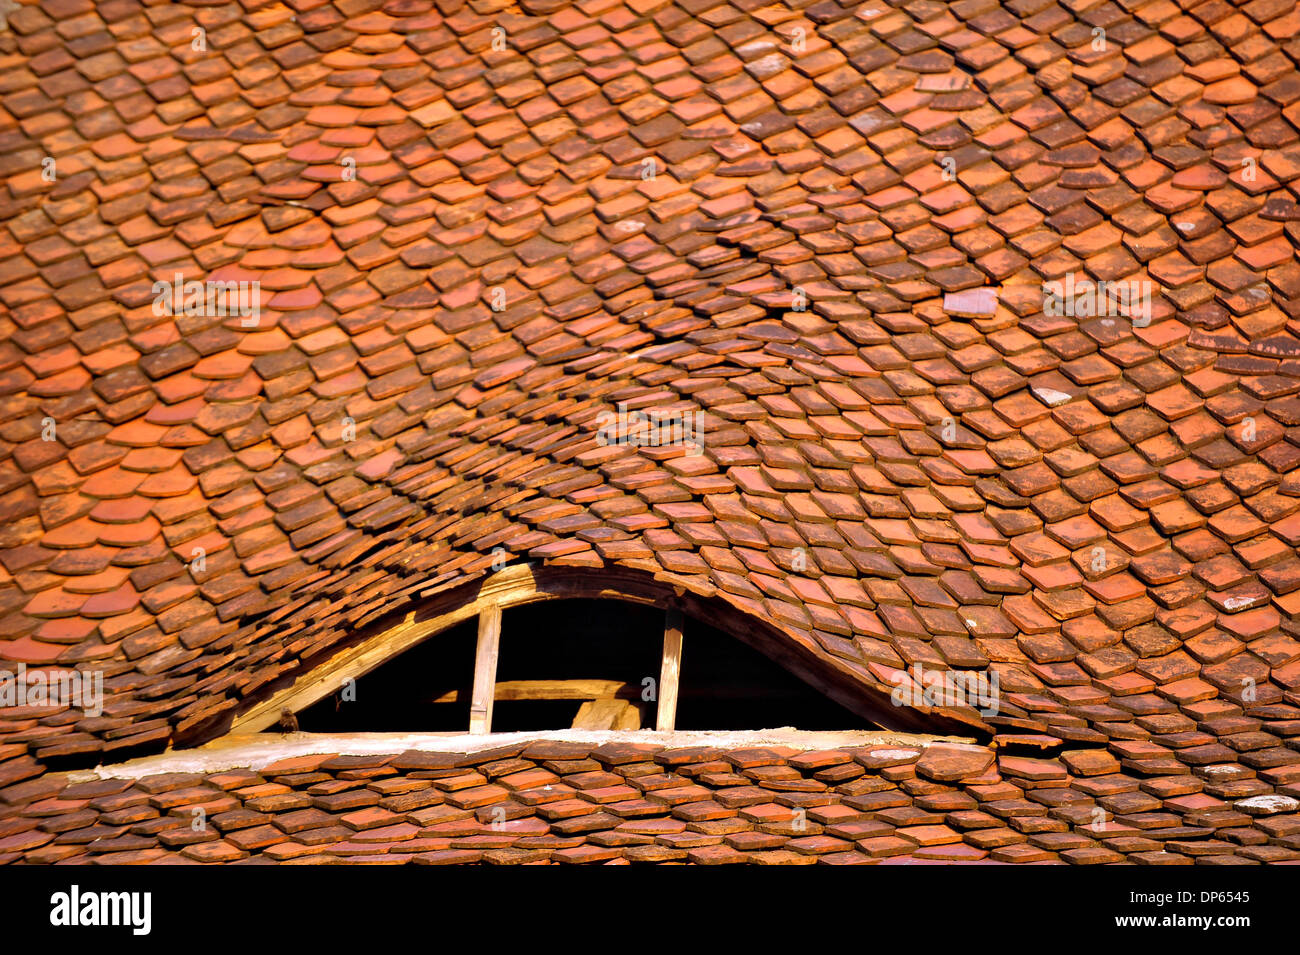 Architecture detail with attic window and old roof tile Stock Photo